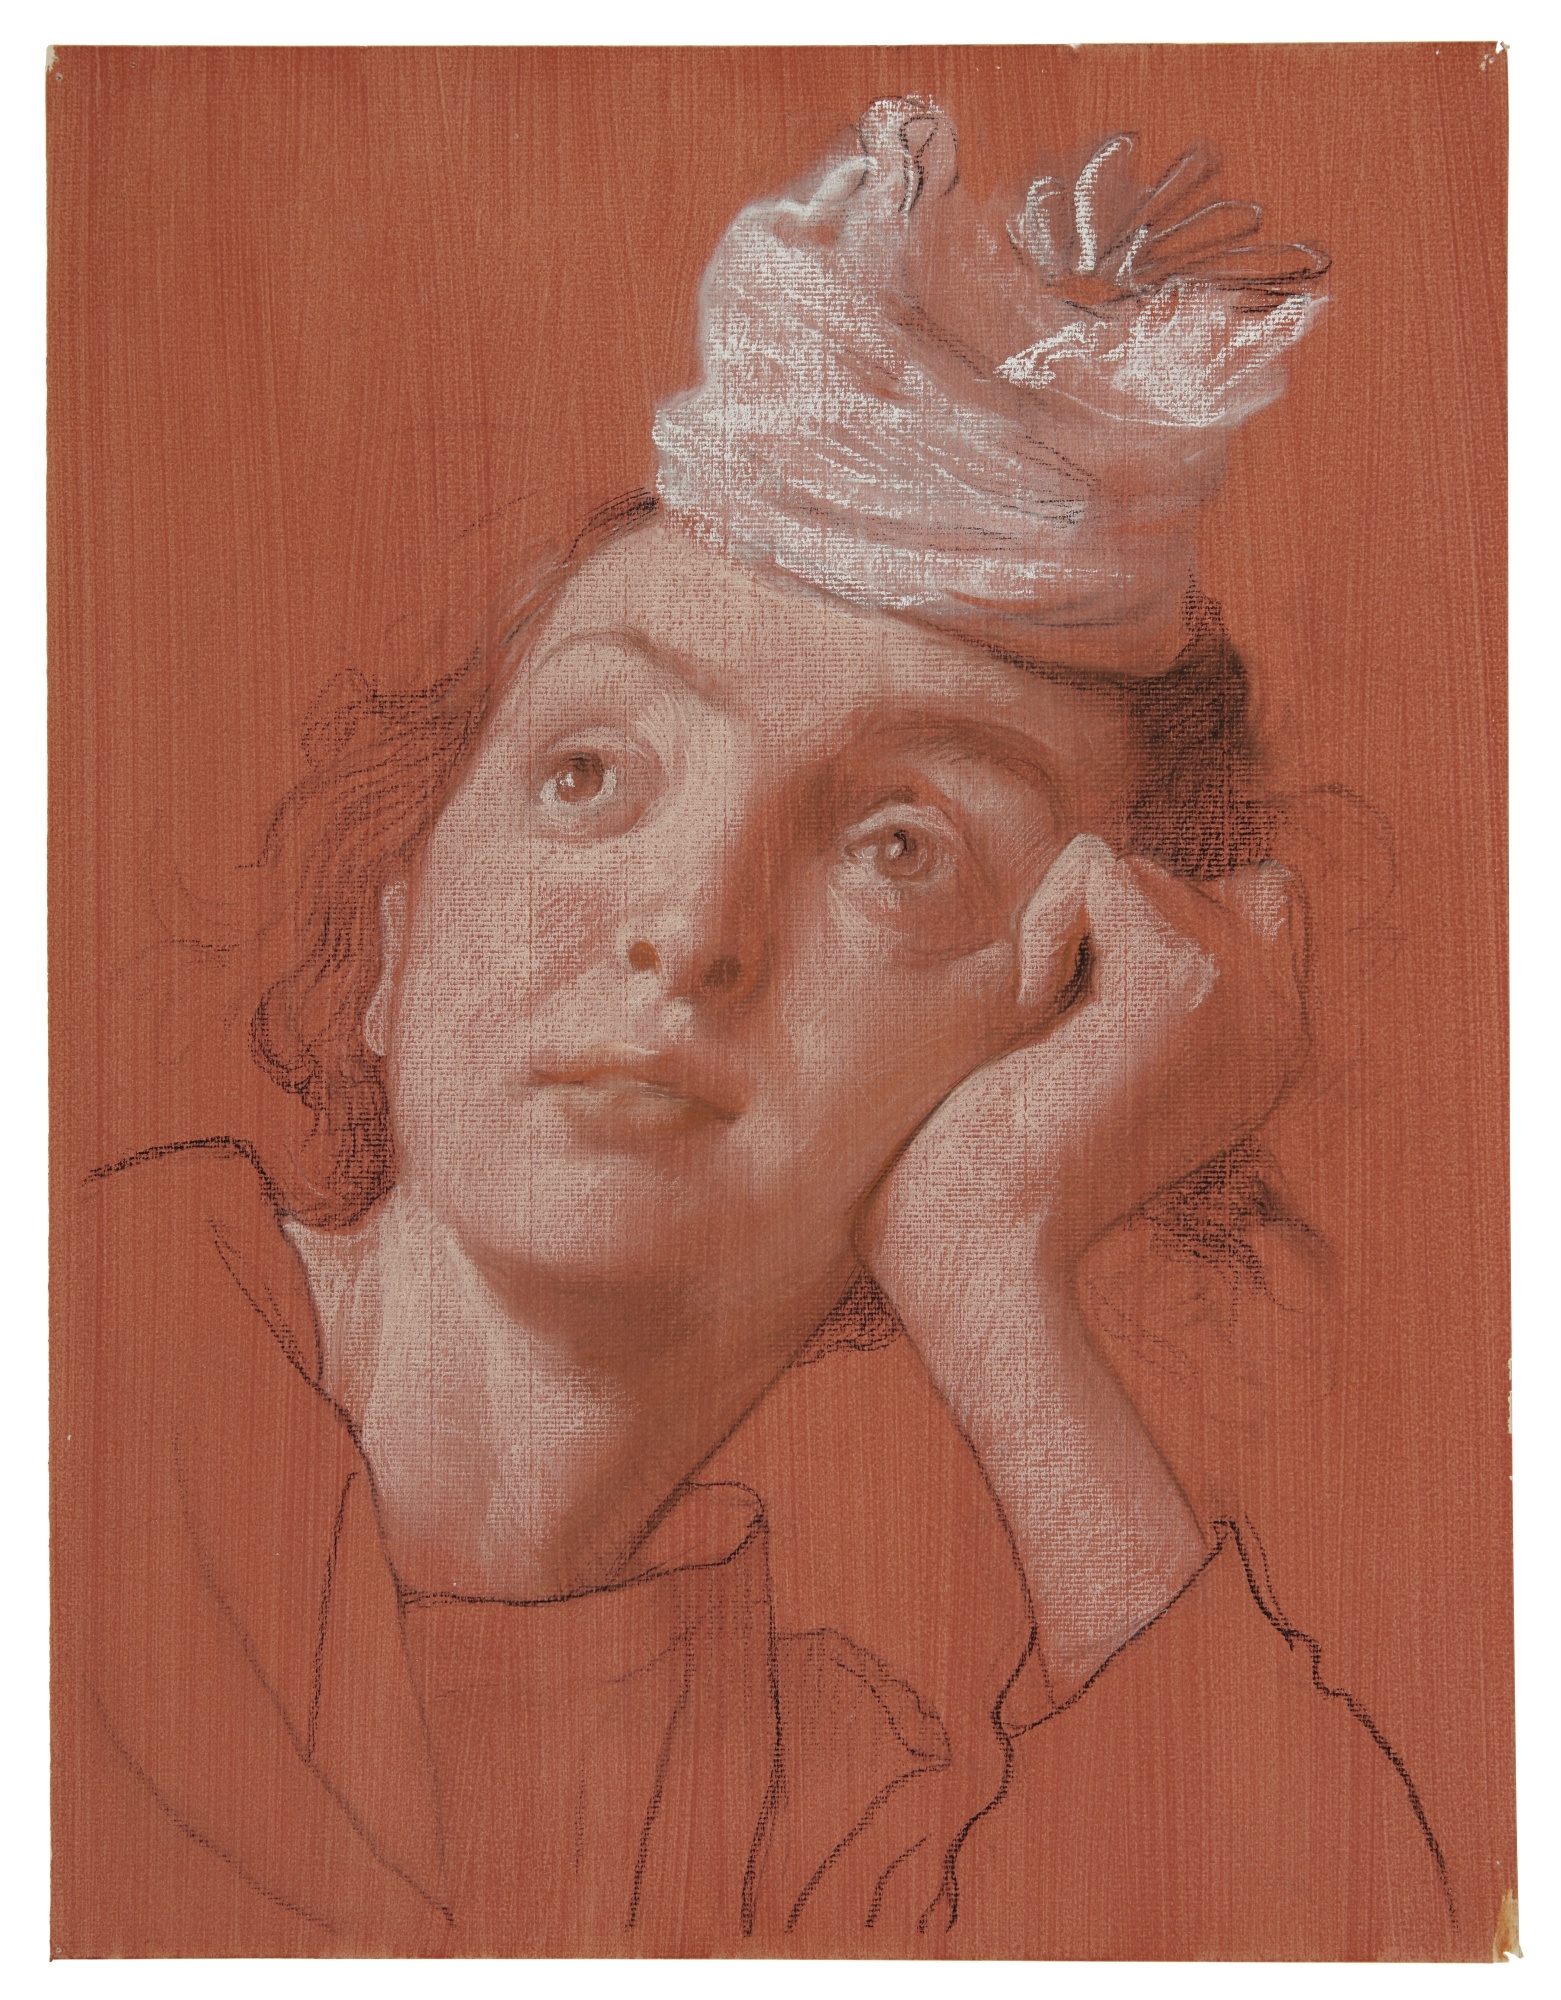 Artwork by John Currin, STUDY FOR THE PENITENT, Made of conte crayon, pastel and wash on paper